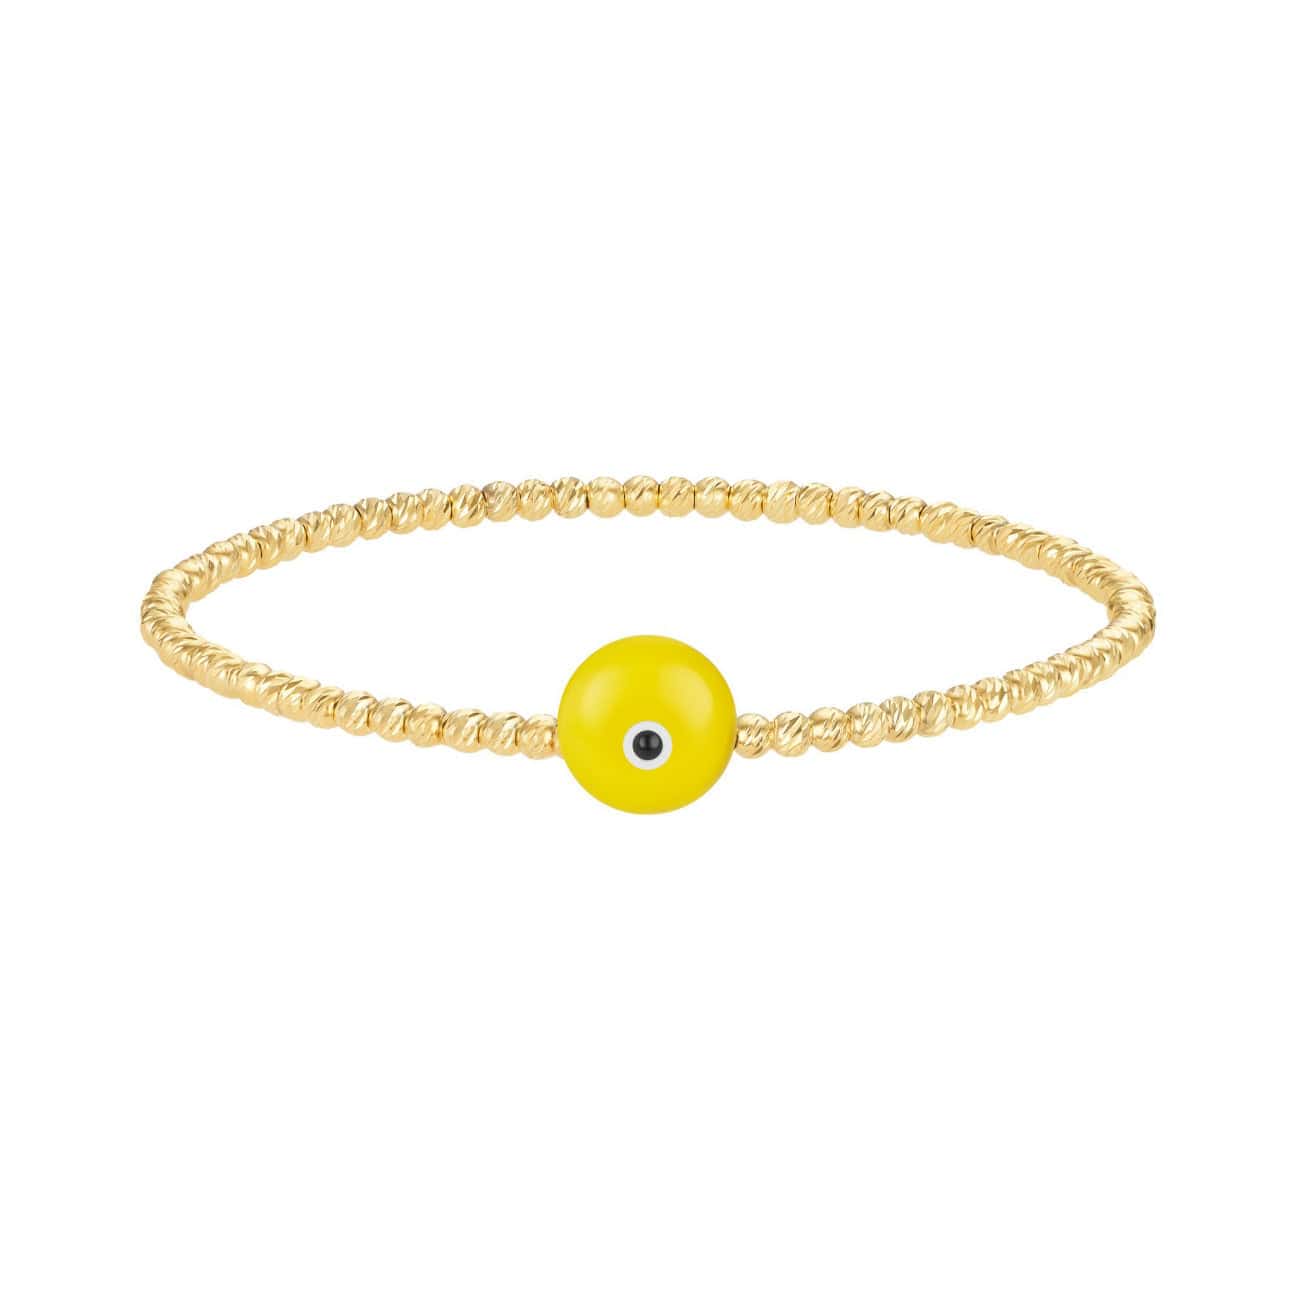 Bead Bracelet with Majestic Evil Eye - Yellow Gold and Yellow - Golden Tangerine